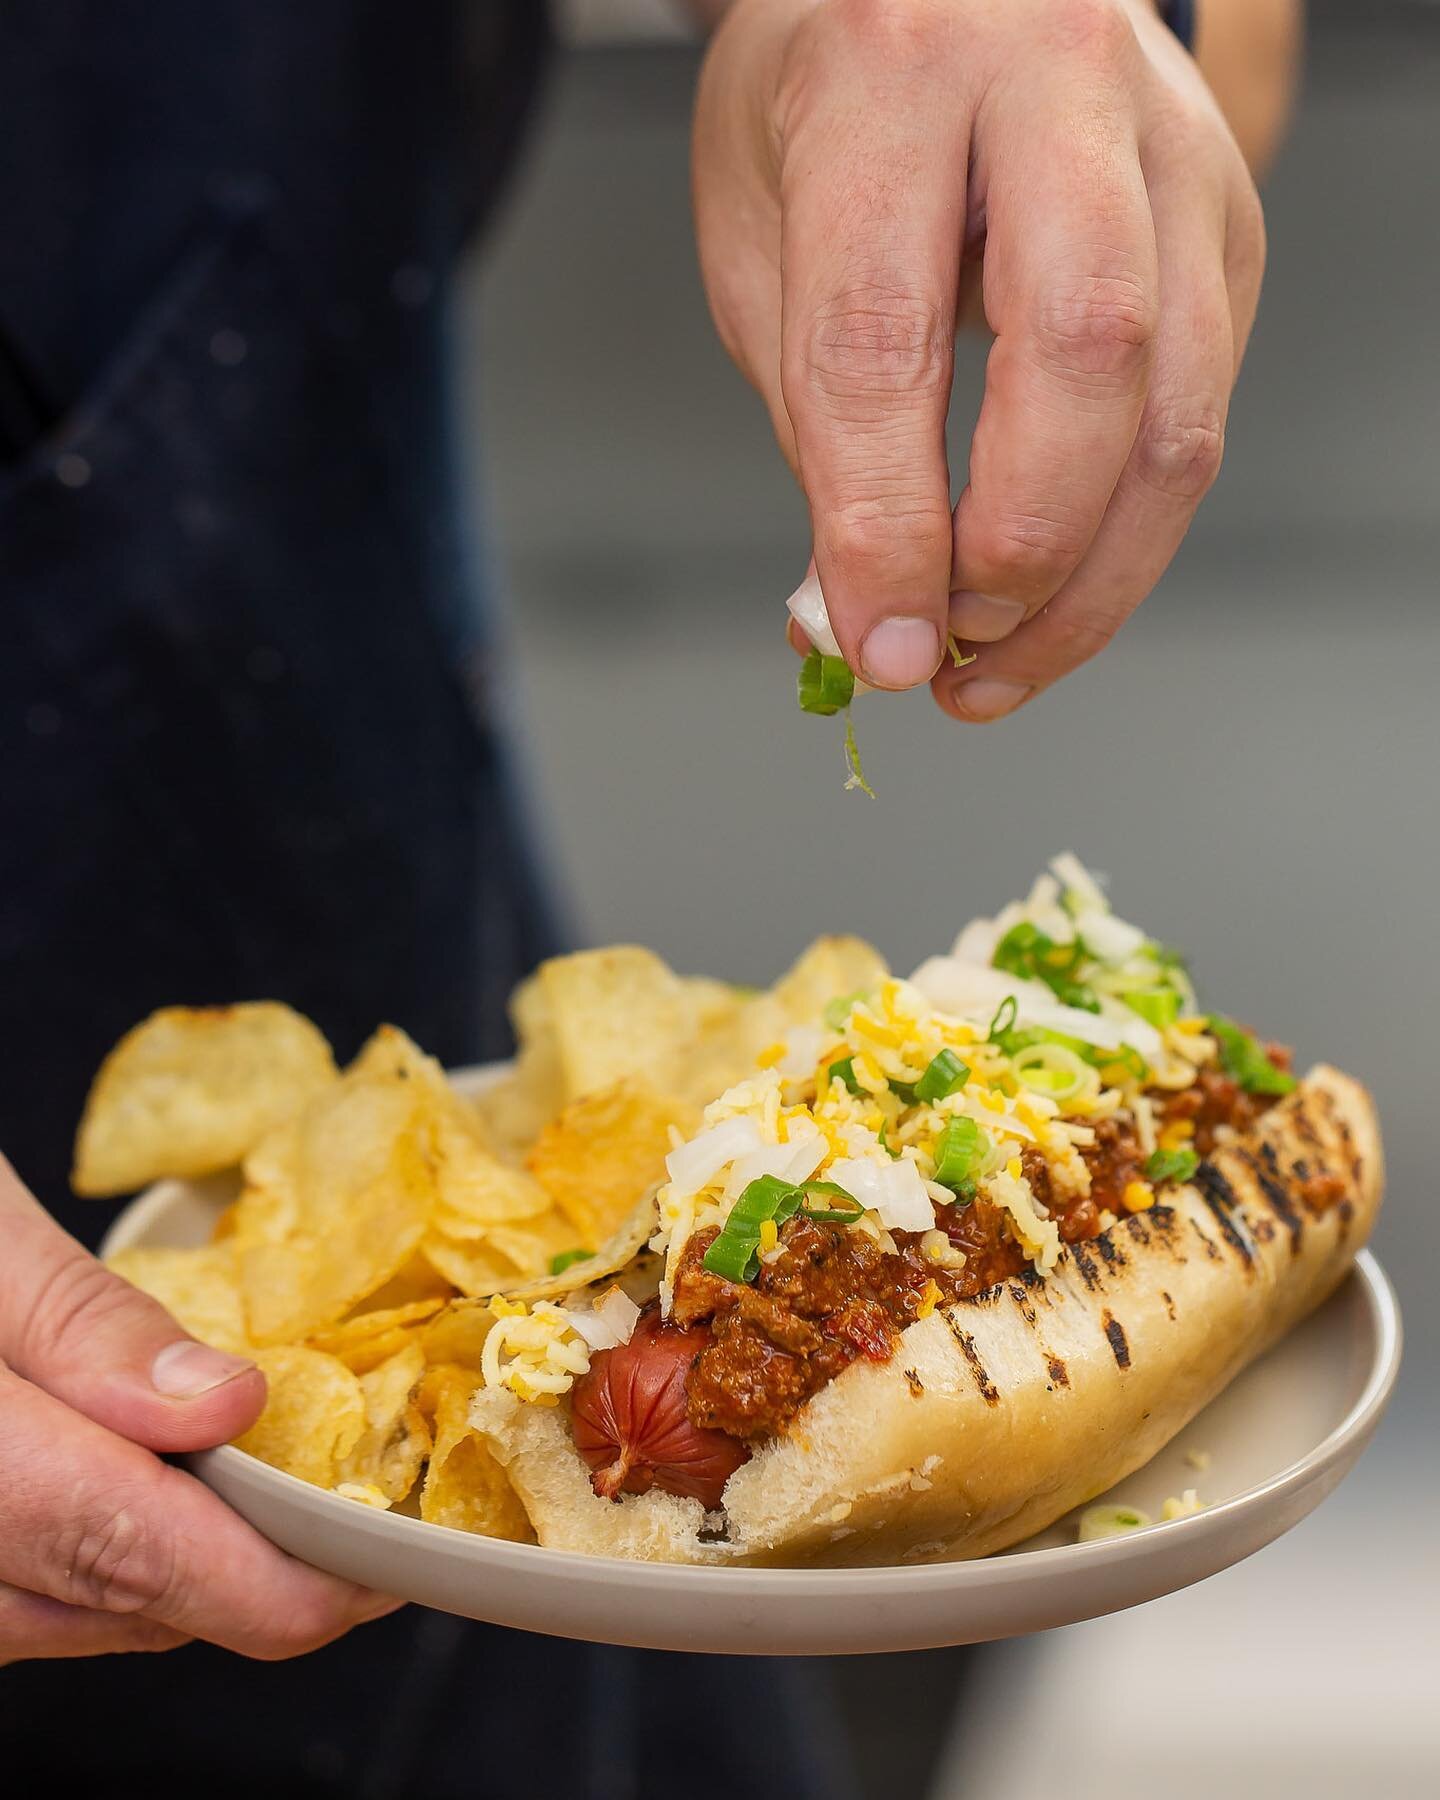 Sunday Funkday Specials ➡️ today only, 11am til sold out!

🌭Kimchi Dog
@NimanRanch all-natural hot dog with house-made kimchi, gochujang sauce, roasted street corn, pickled fresnos, and cotija cheese 

🍾 Funky Flight - 4x4oz rare barrel aged, libra